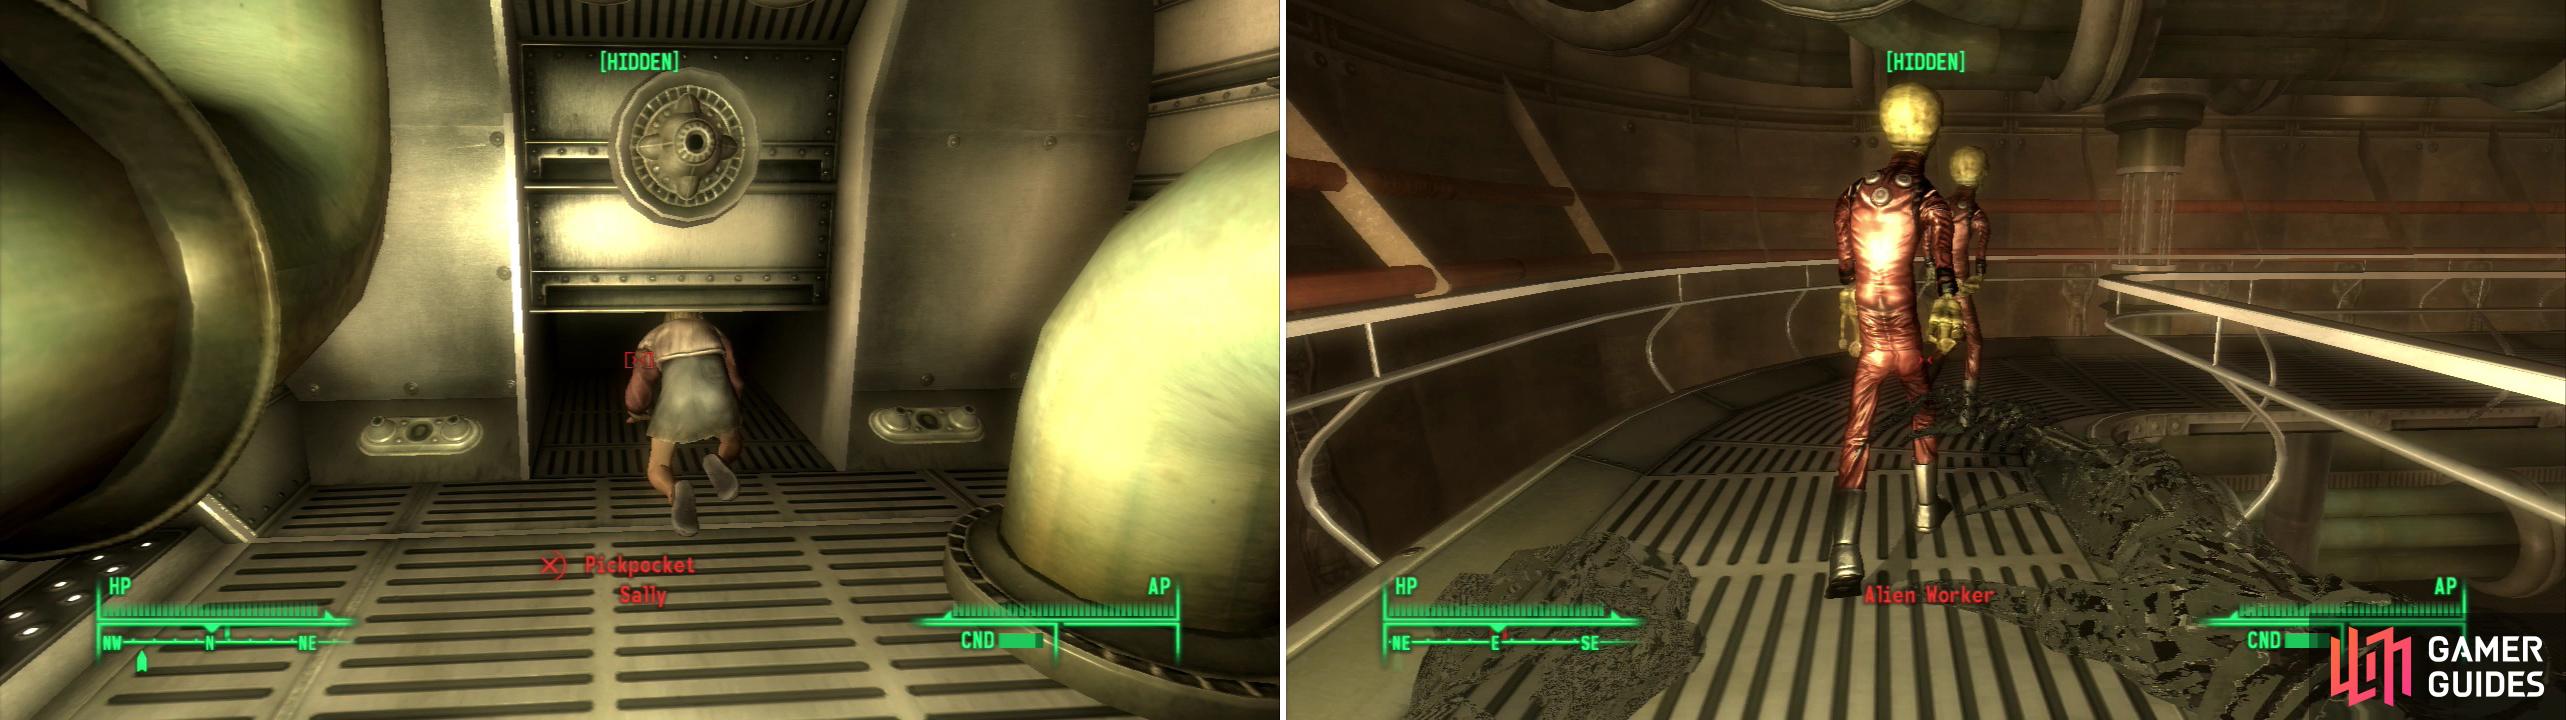 Sally’s size allows her to sneak around-which will prove invaluable, since it allows you access to parts of the ship you wouldn’t otherwise be able to reach (left). Worker aliens don’t pose a threat to you (right), but they’re still narks, so you might as well kill them… even if it will cost you some karma.